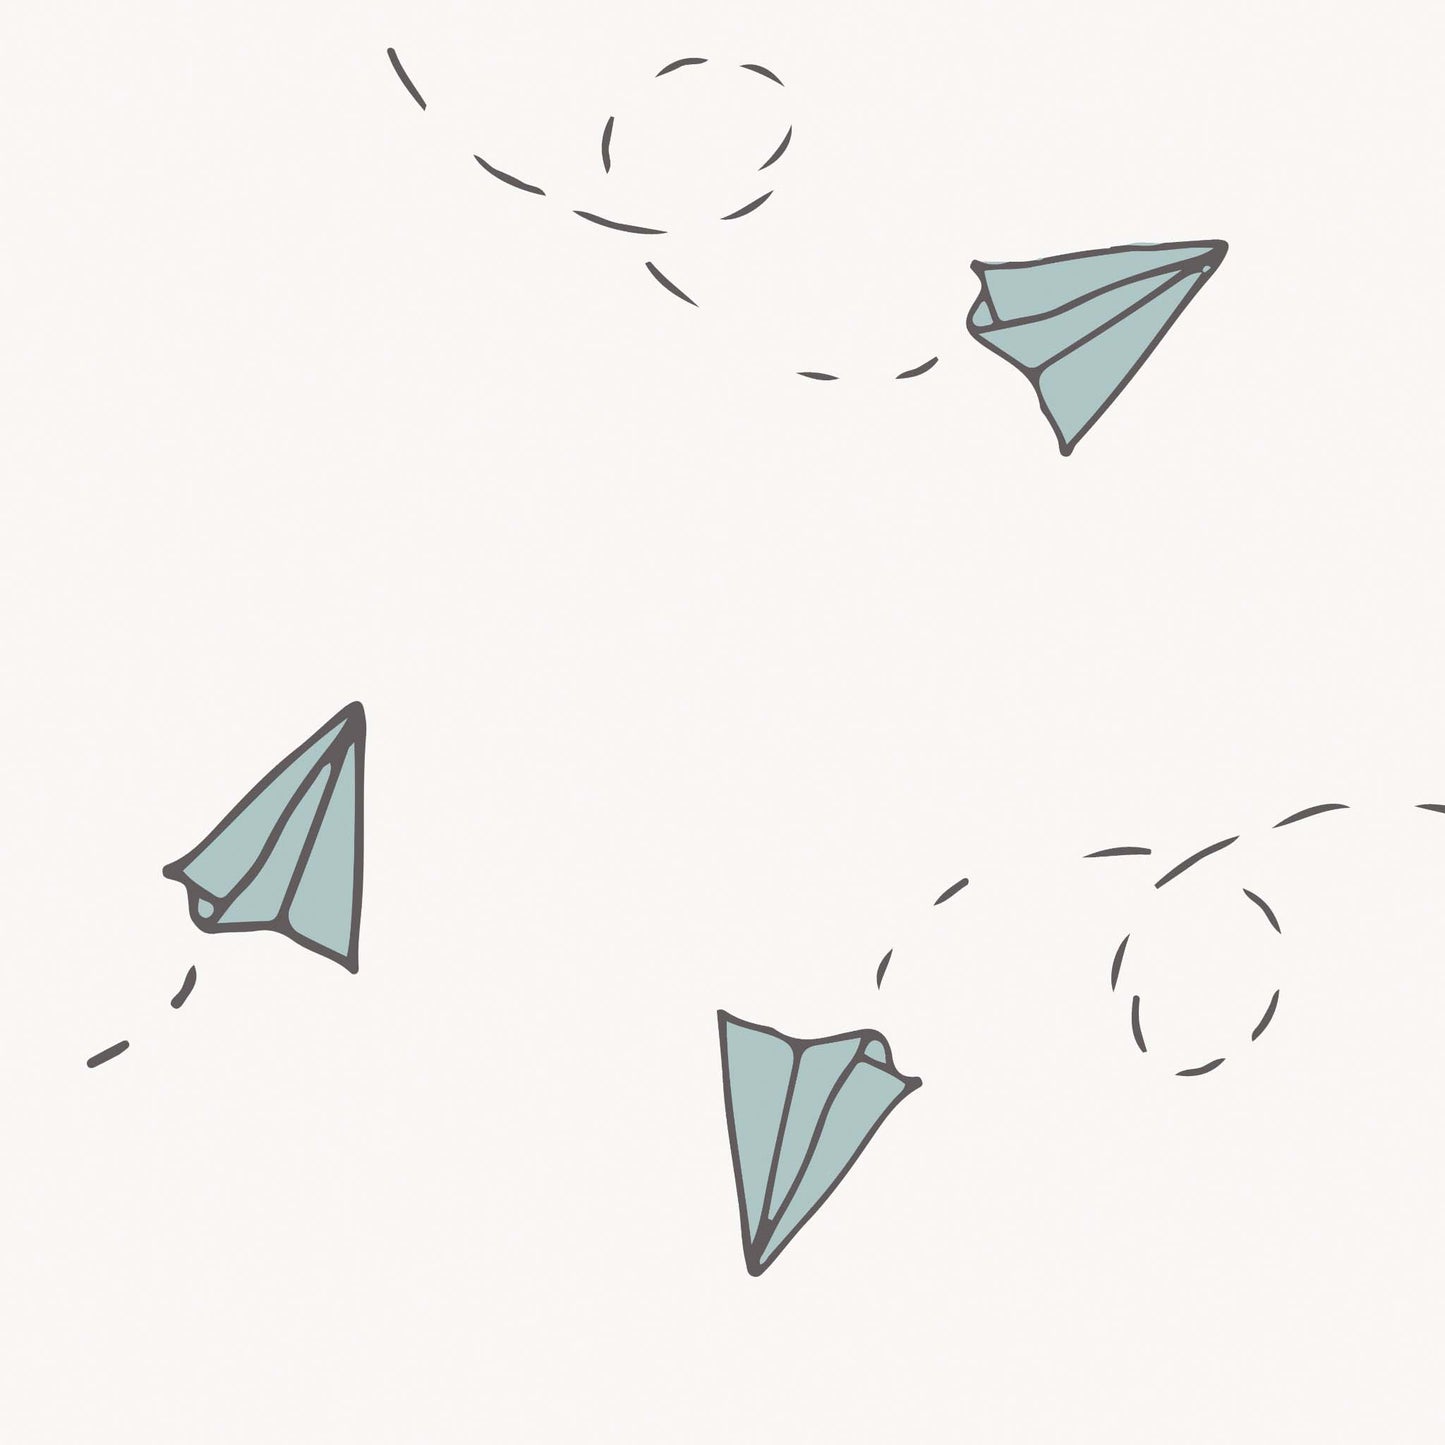 Illustration of three paper airplanes flying in the sky - Airplane